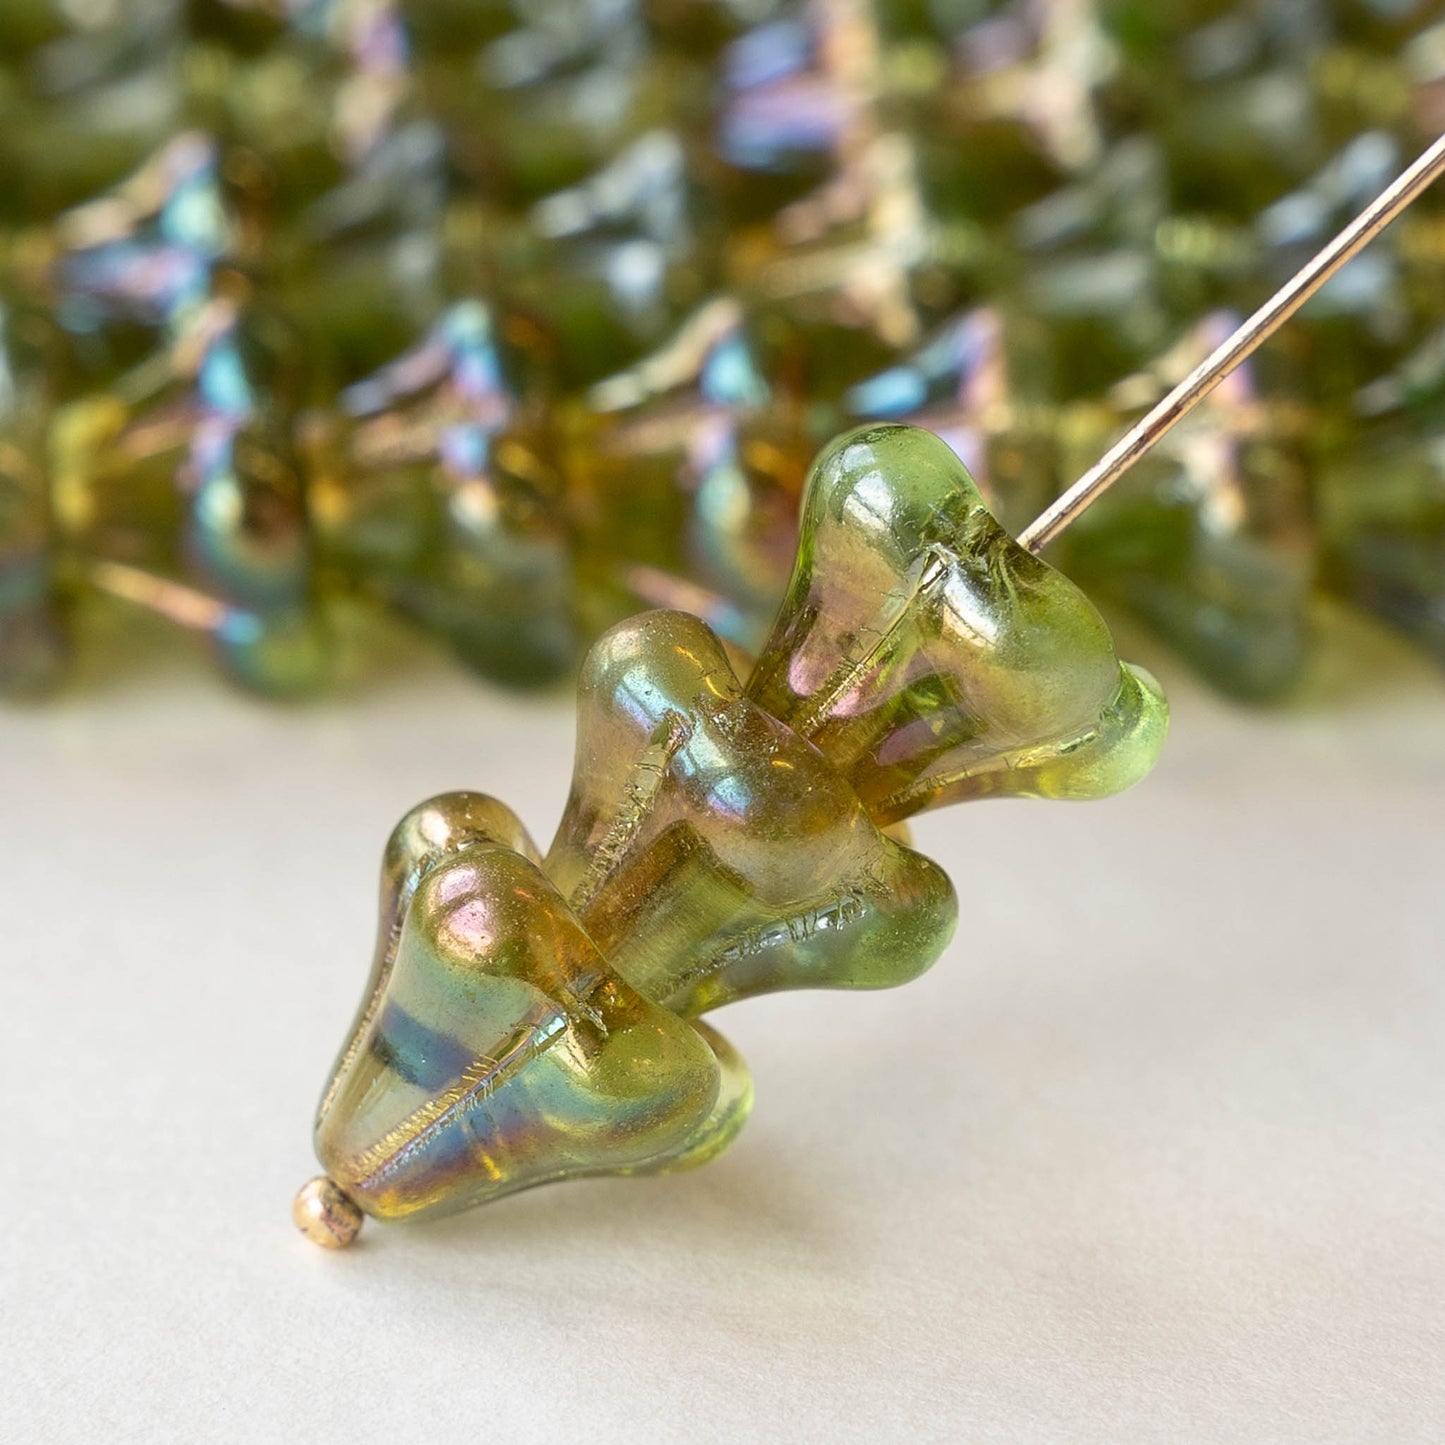 Load image into Gallery viewer, 10x12mm Trumpet Flower Beads - Peridot Green Celsian - 10 beads
